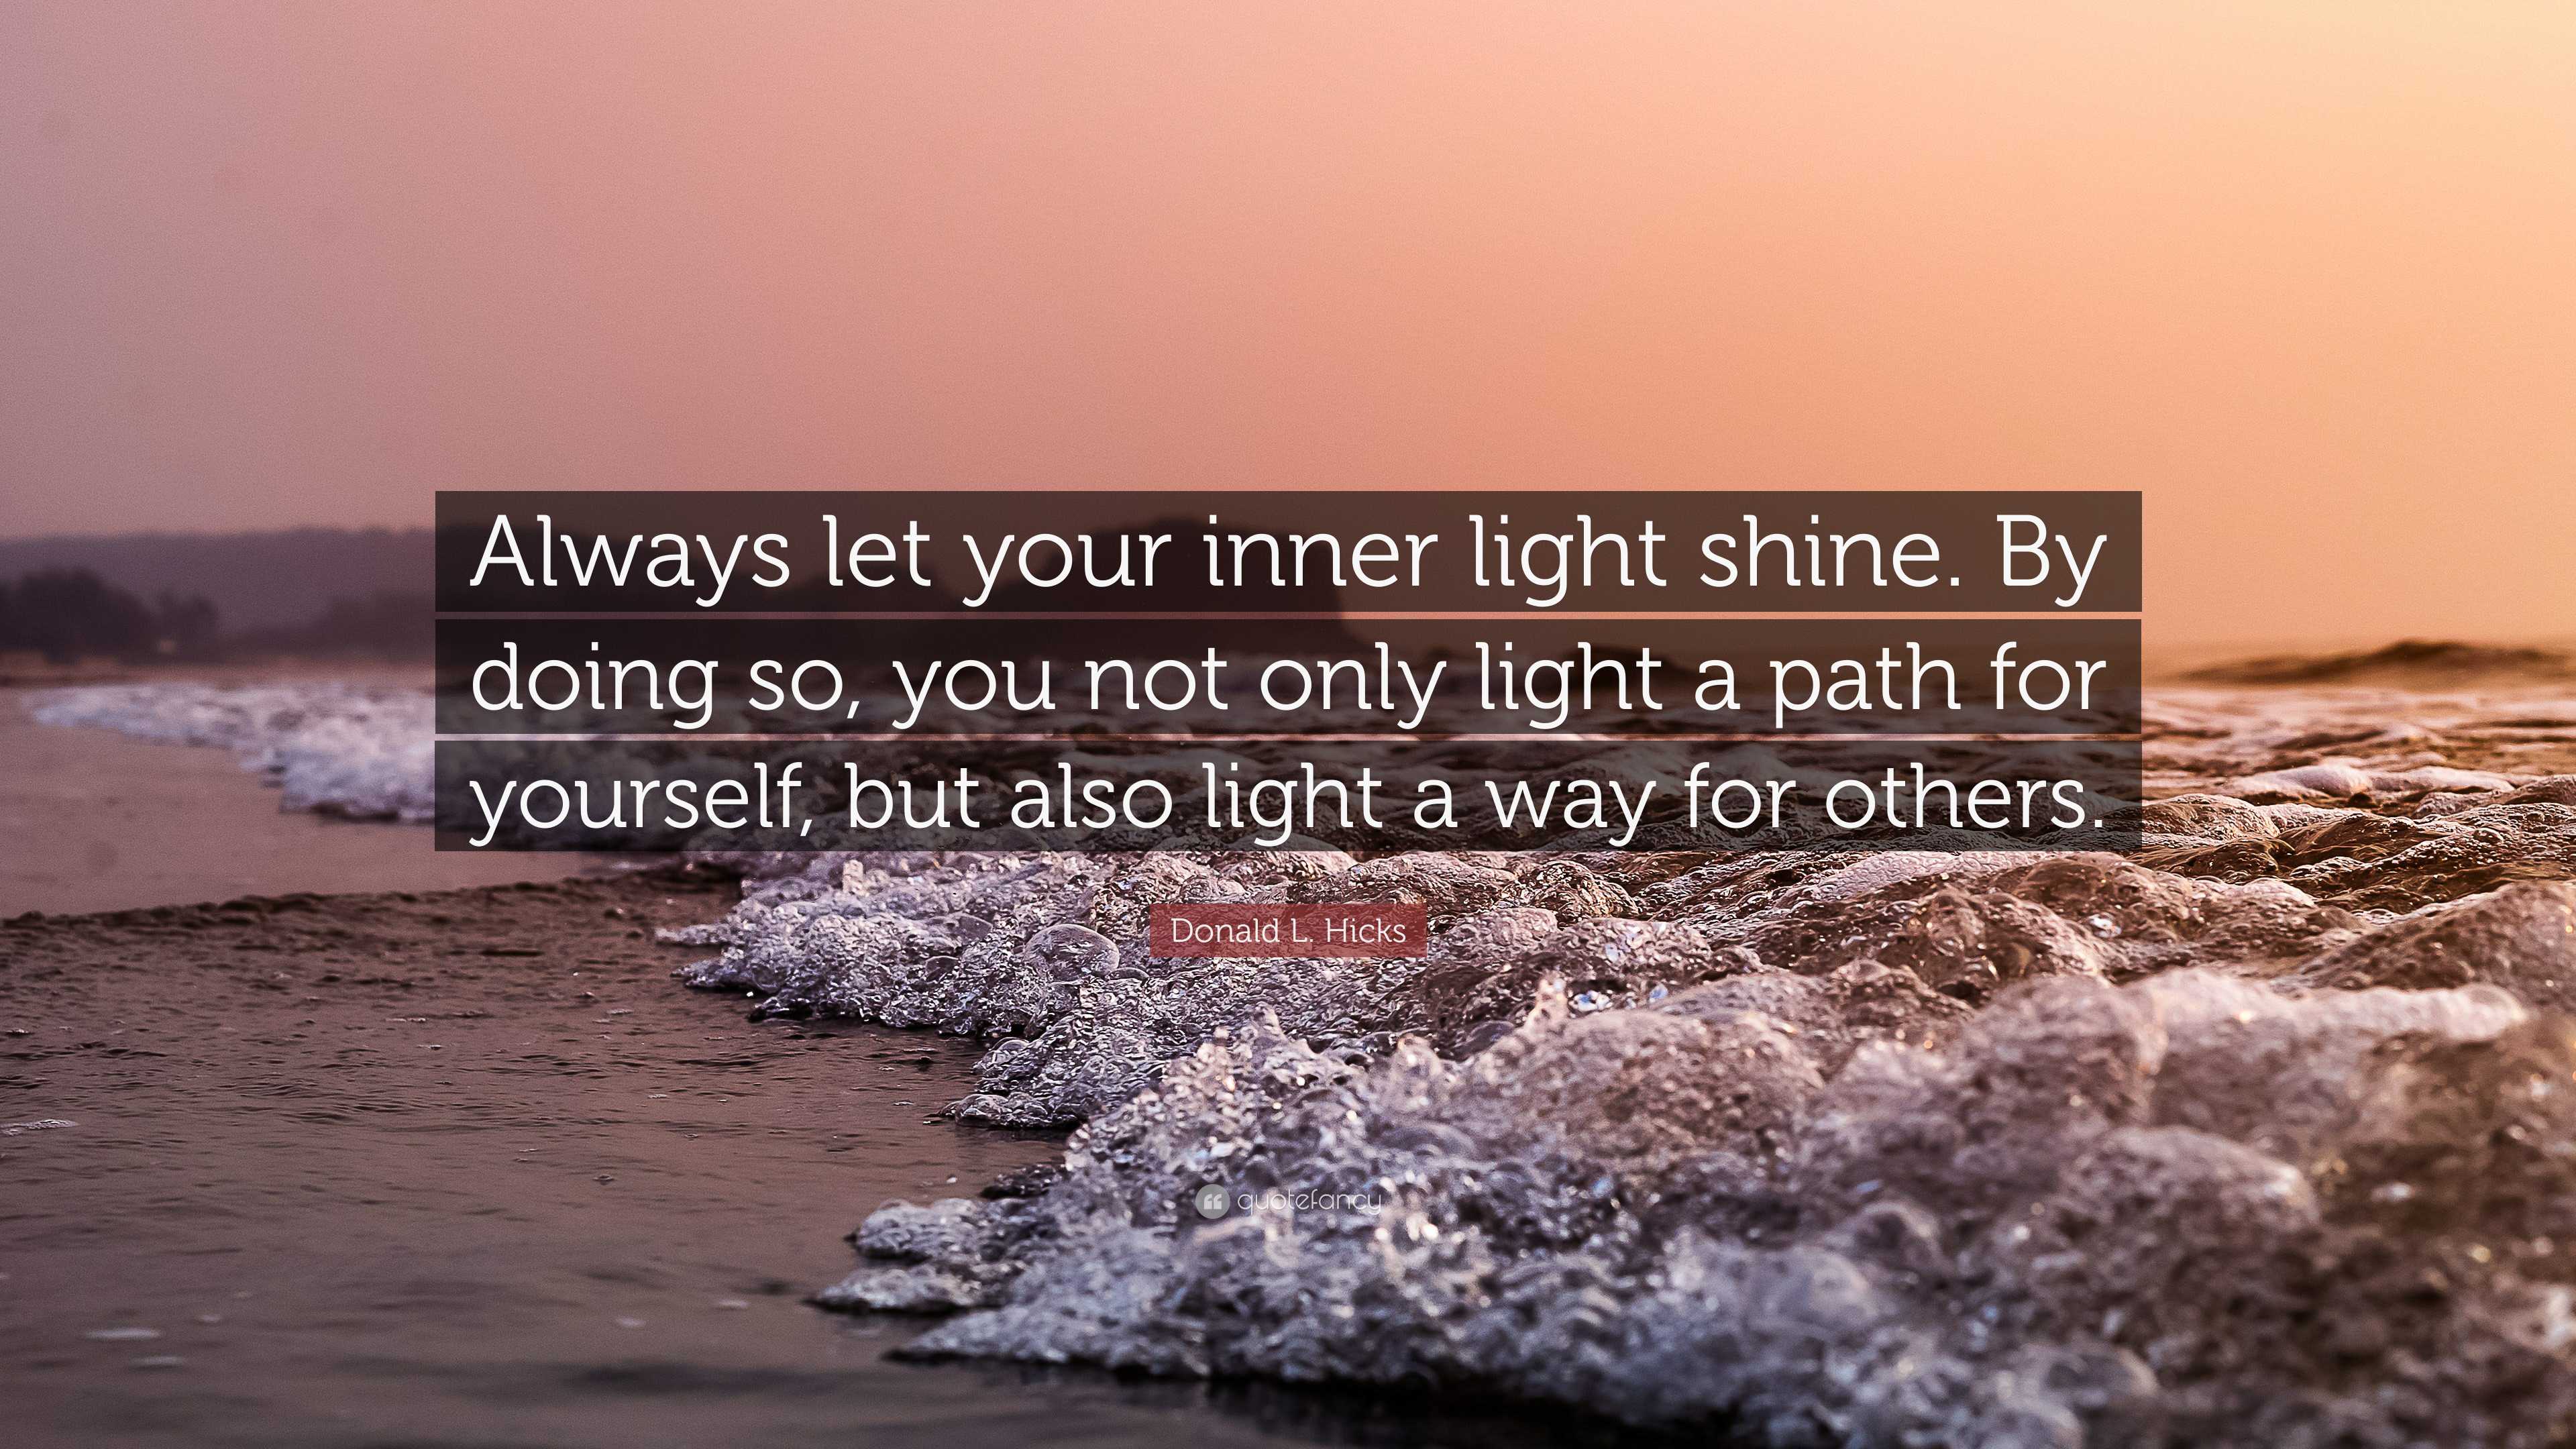 Donald L. Hicks Quote: “Always let your inner light shine. By